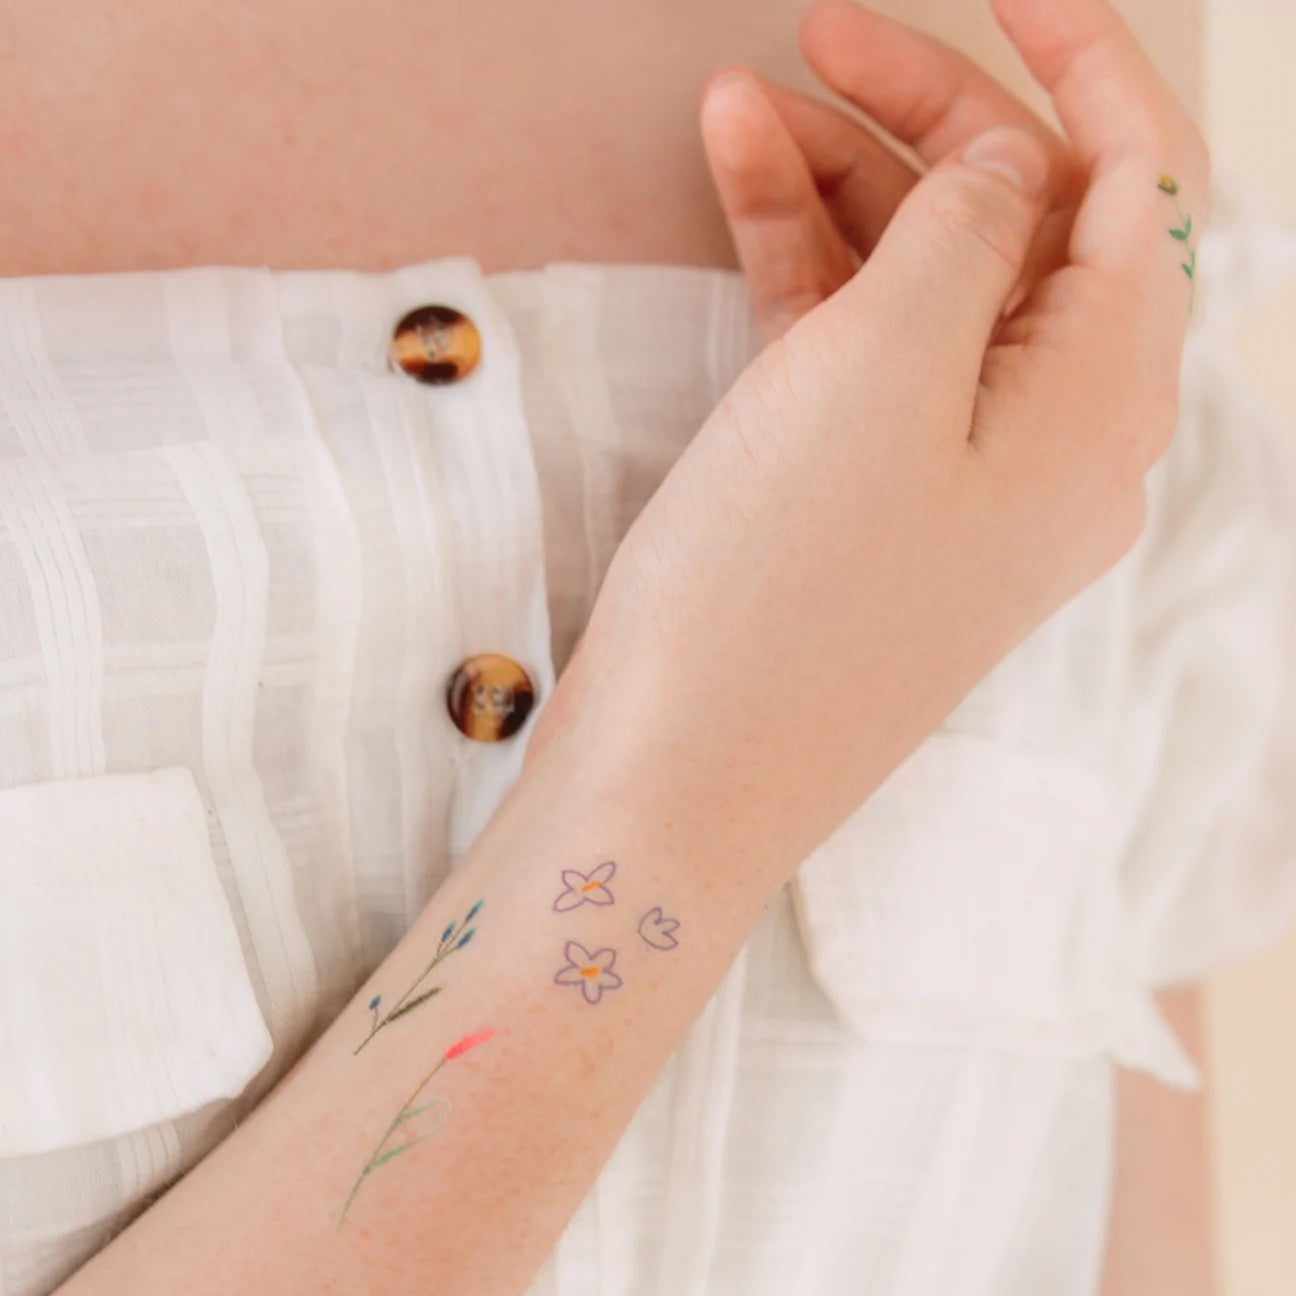 The Cutest Tiny Tattoo Trends For You To Check Out - Society19